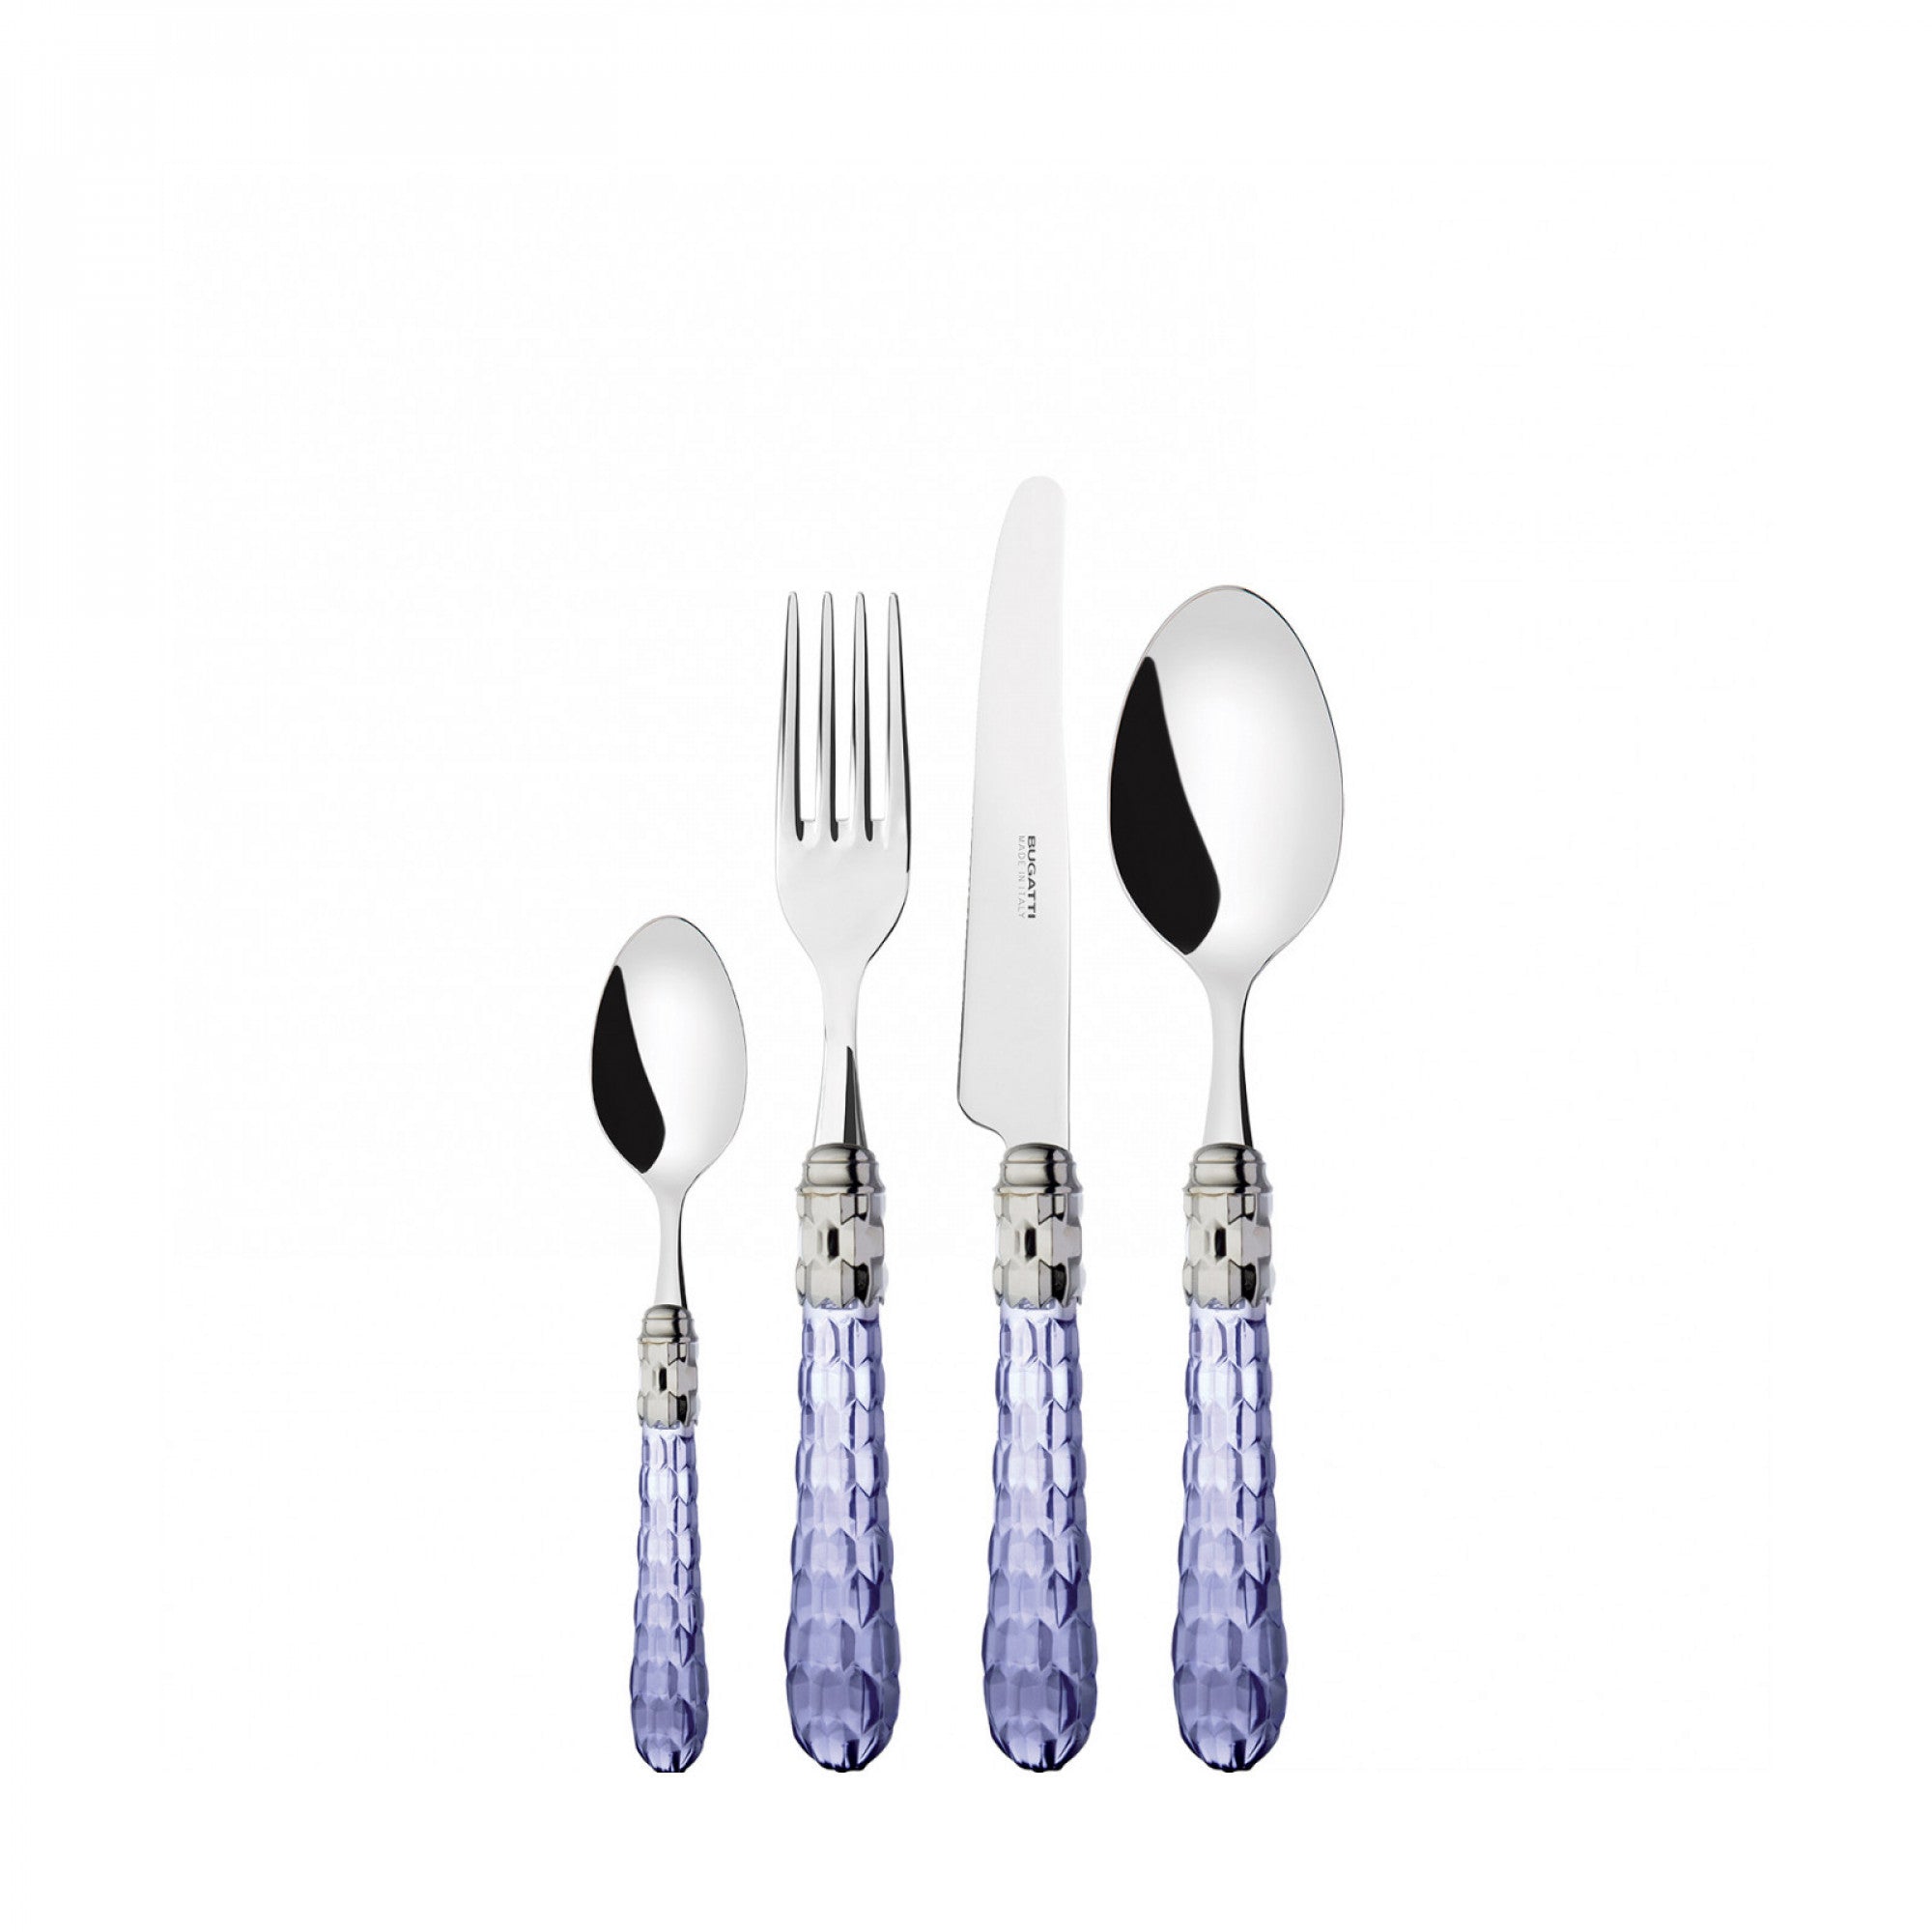 BUGATTI, Cristallo, 24-piece cutlery set in 18/10 stainless steel, chromed ring. Packaged in wooden case with wengé finish